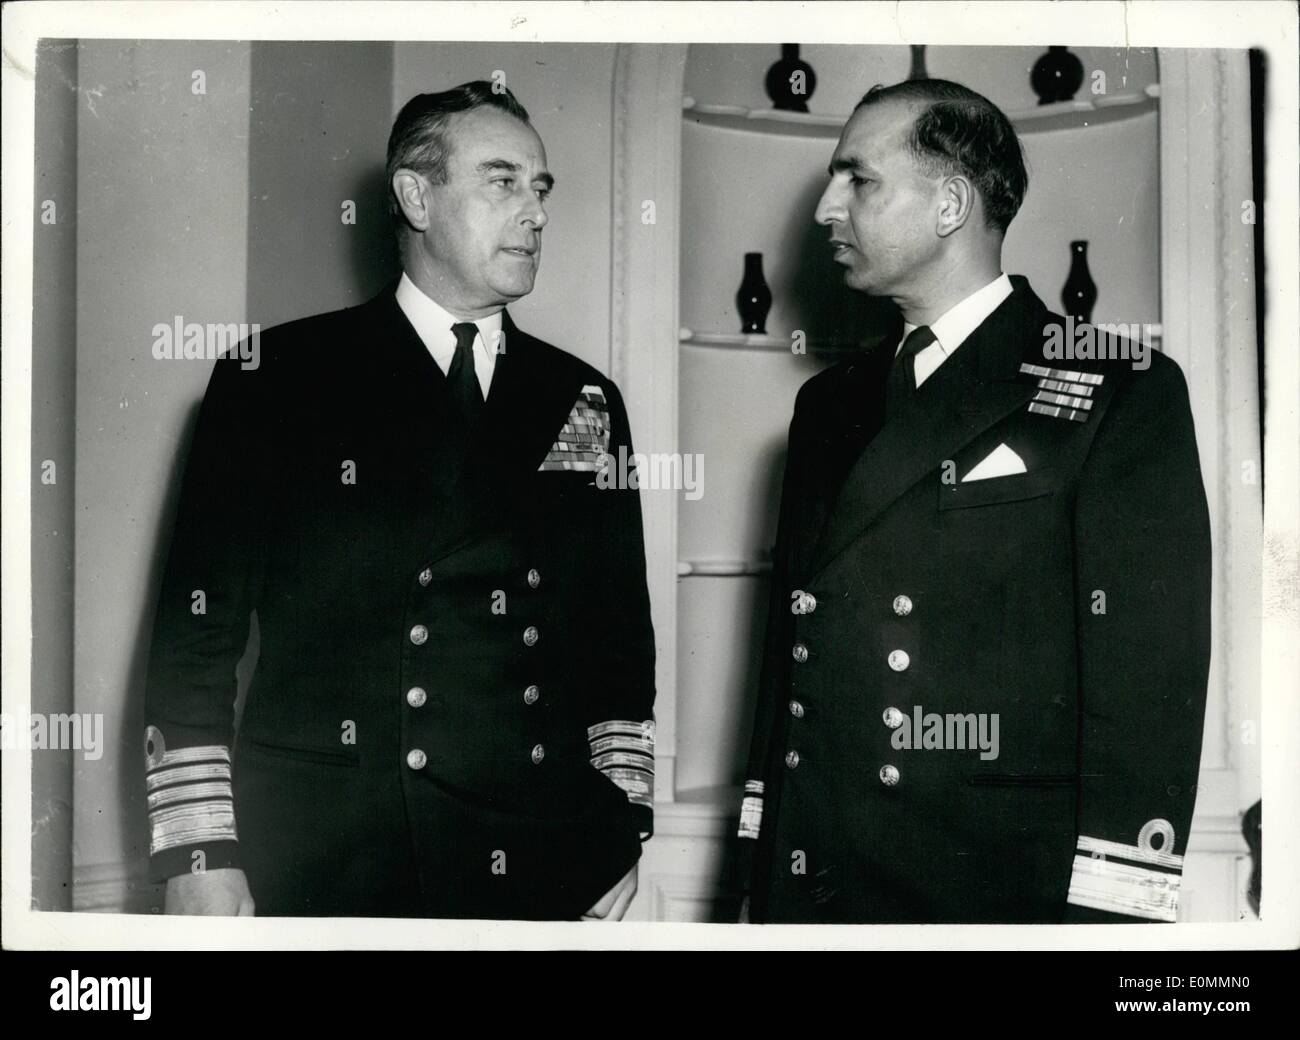 Dec. 12, 1955 - Pakistan's Naval Commander-In-Chief Lunches With Lord Mountbatten: Rear Admiral Choudri the Pakistan Naval Commander-in-Chief who arrived in London last evening for talks with the Admiralty - was entertained to Lunch by Lord Mountbatten at the latter's home in Wilton Crescent today. Photo shows Rear Admiral Choudri and Lord Mountbatten - during the lunch today. Stock Photo